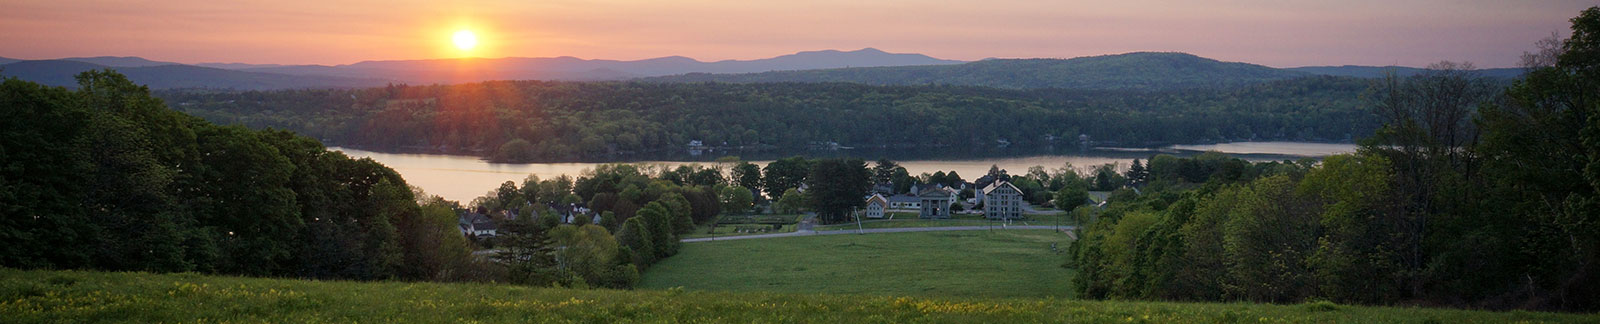 Sunrise over Lake Mascoma and Enfield Shaker Museum in Enfield, New Hampshire,